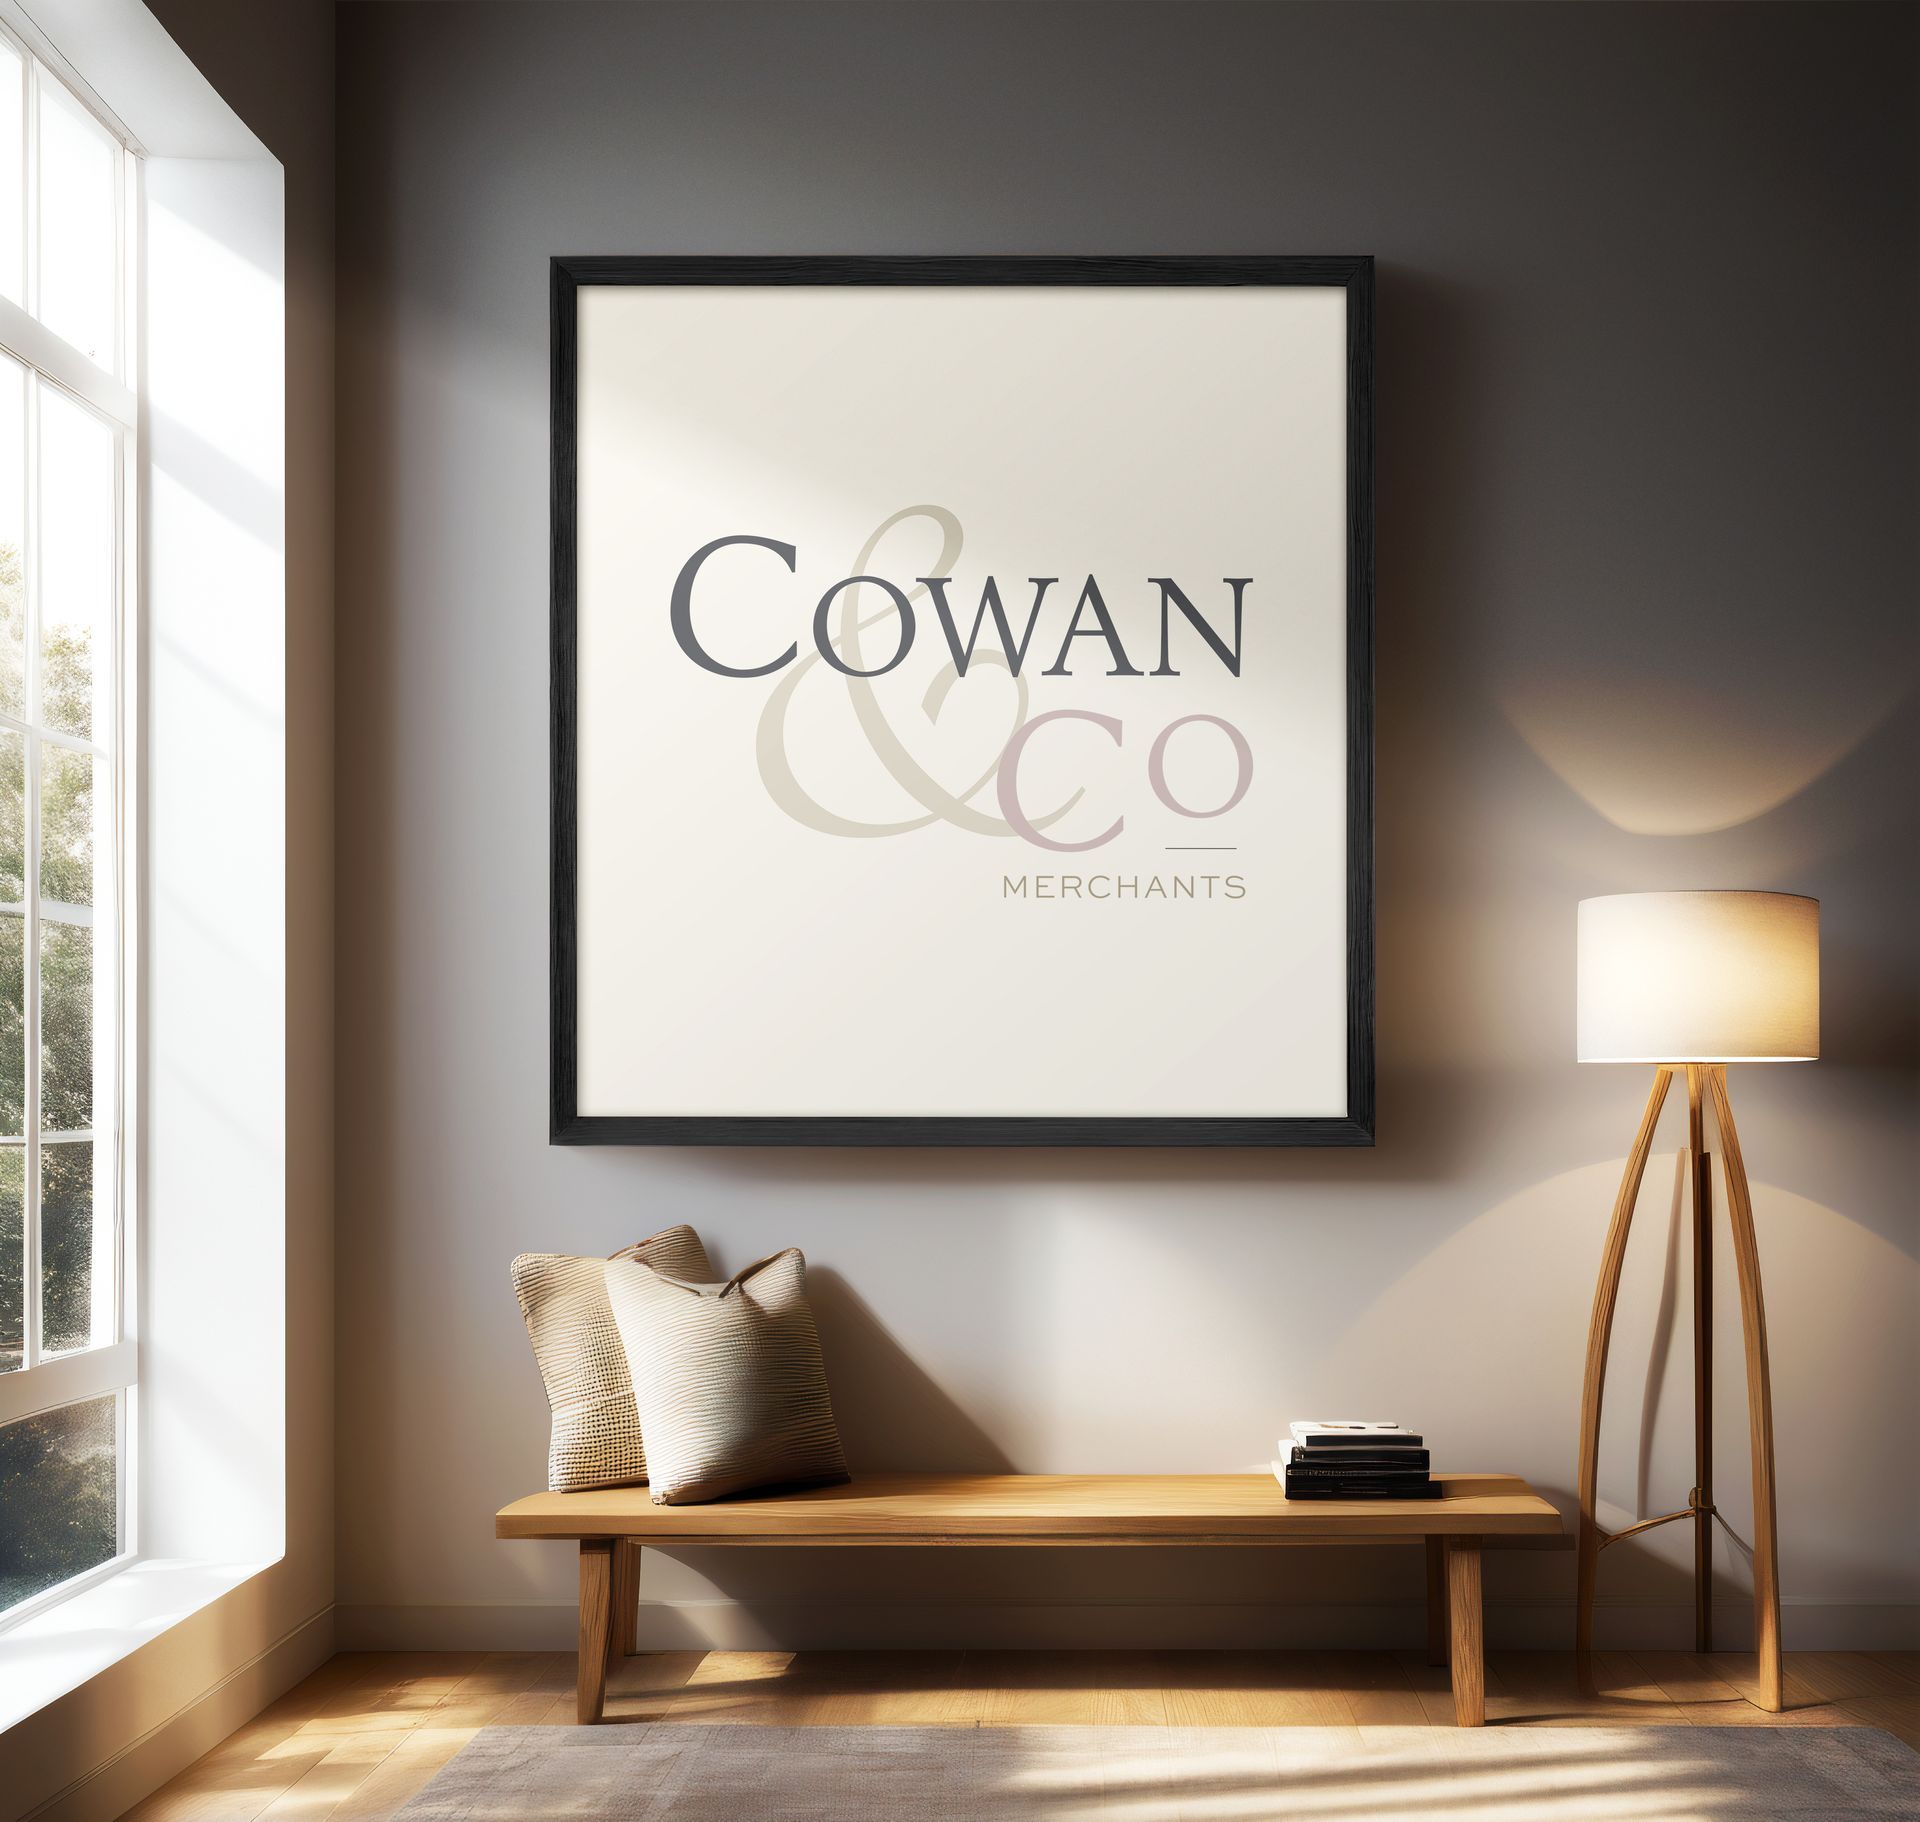 A cowan & co. poster hangs on a wall above a wooden bench